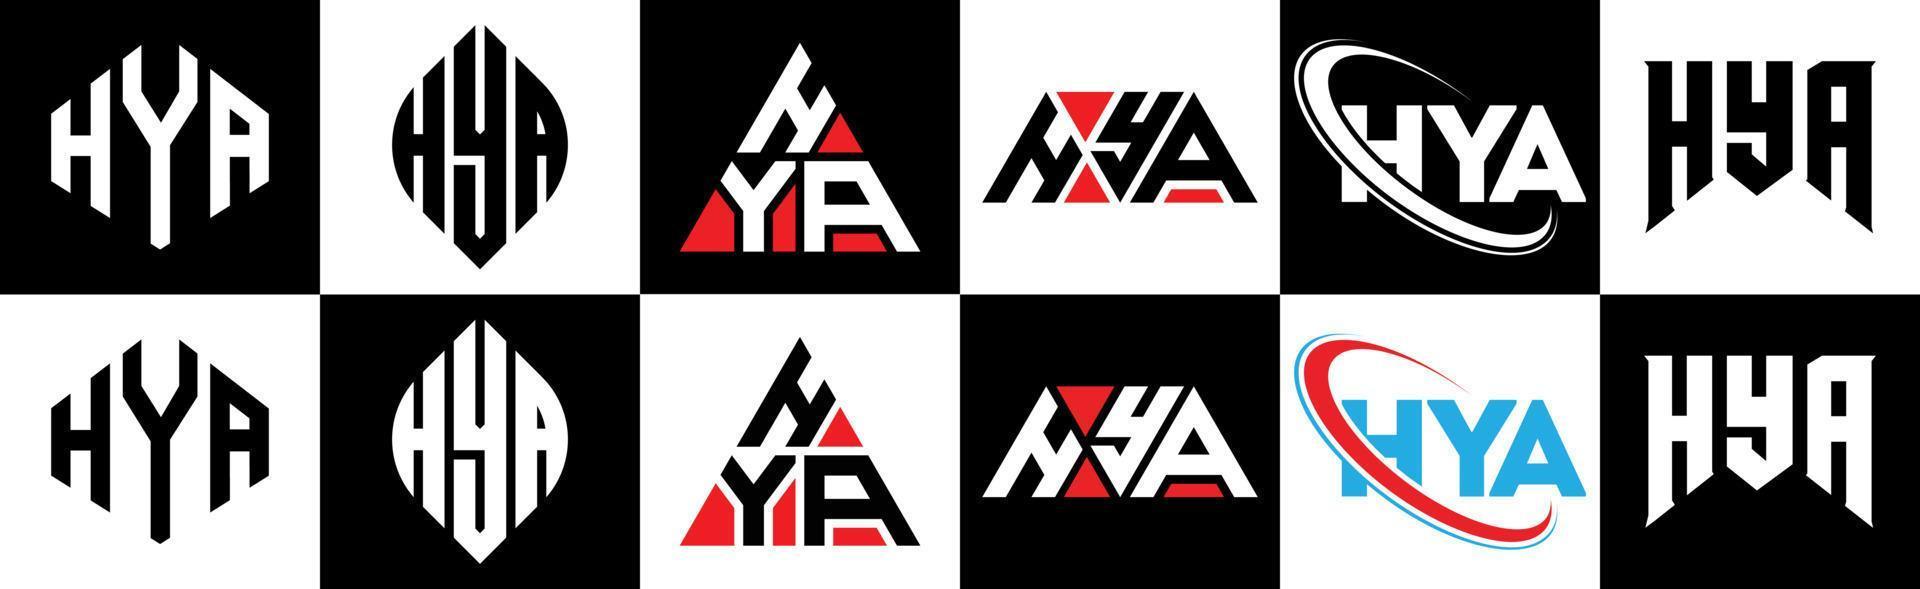 HYA letter logo design in six style. HYA polygon, circle, triangle, hexagon, flat and simple style with black and white color variation letter logo set in one artboard. HYA minimalist and classic logo vector